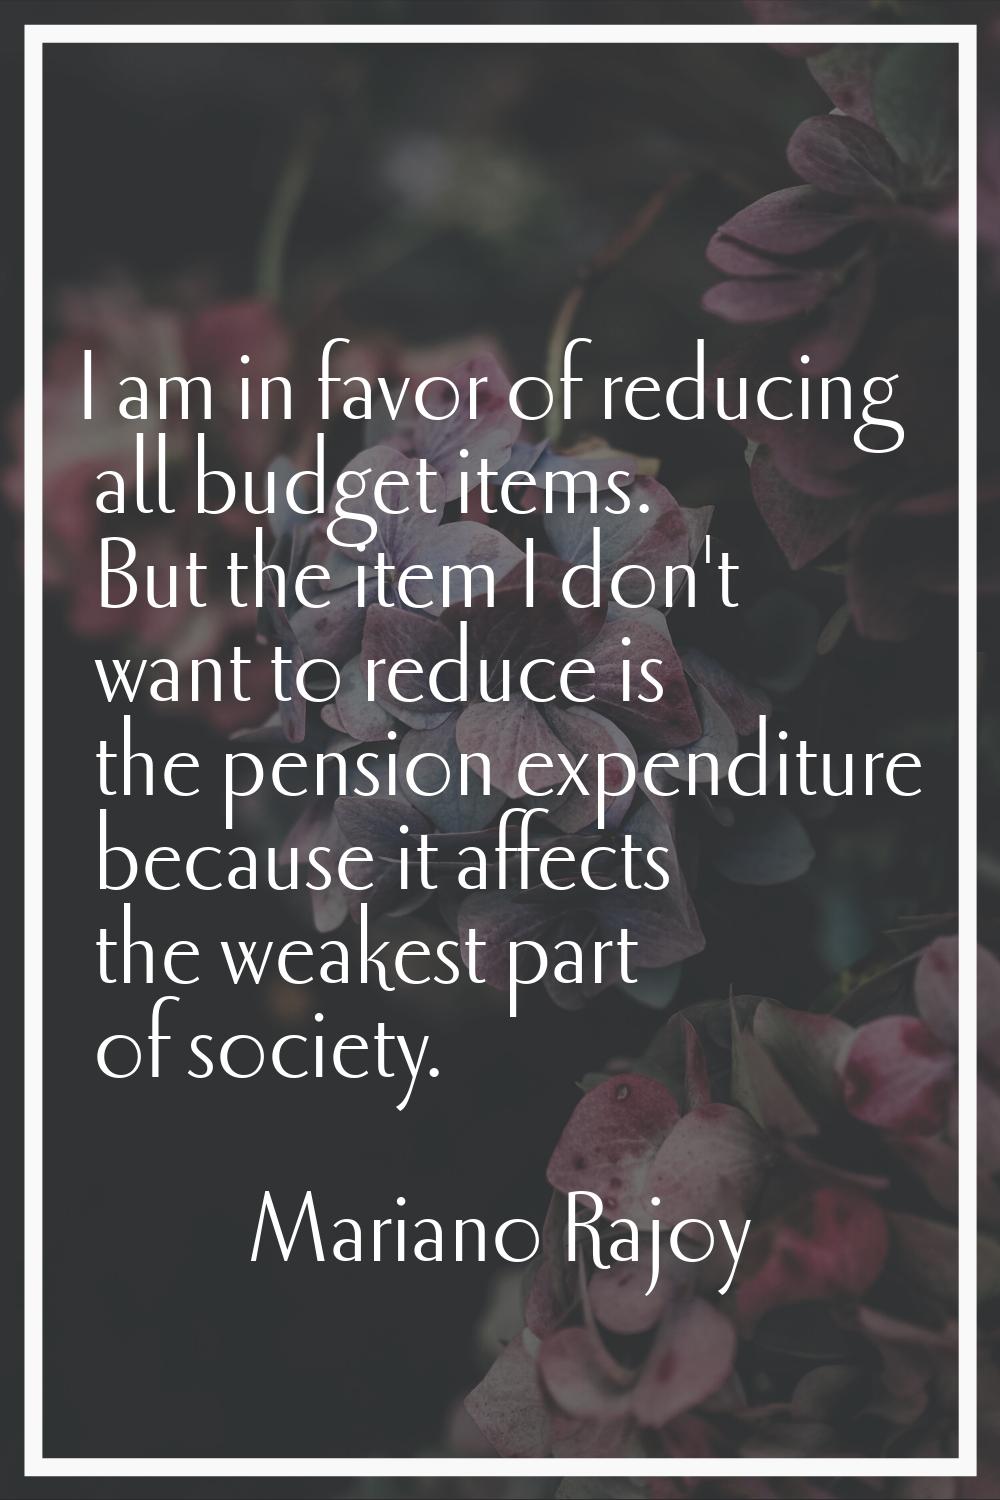 I am in favor of reducing all budget items. But the item I don't want to reduce is the pension expe